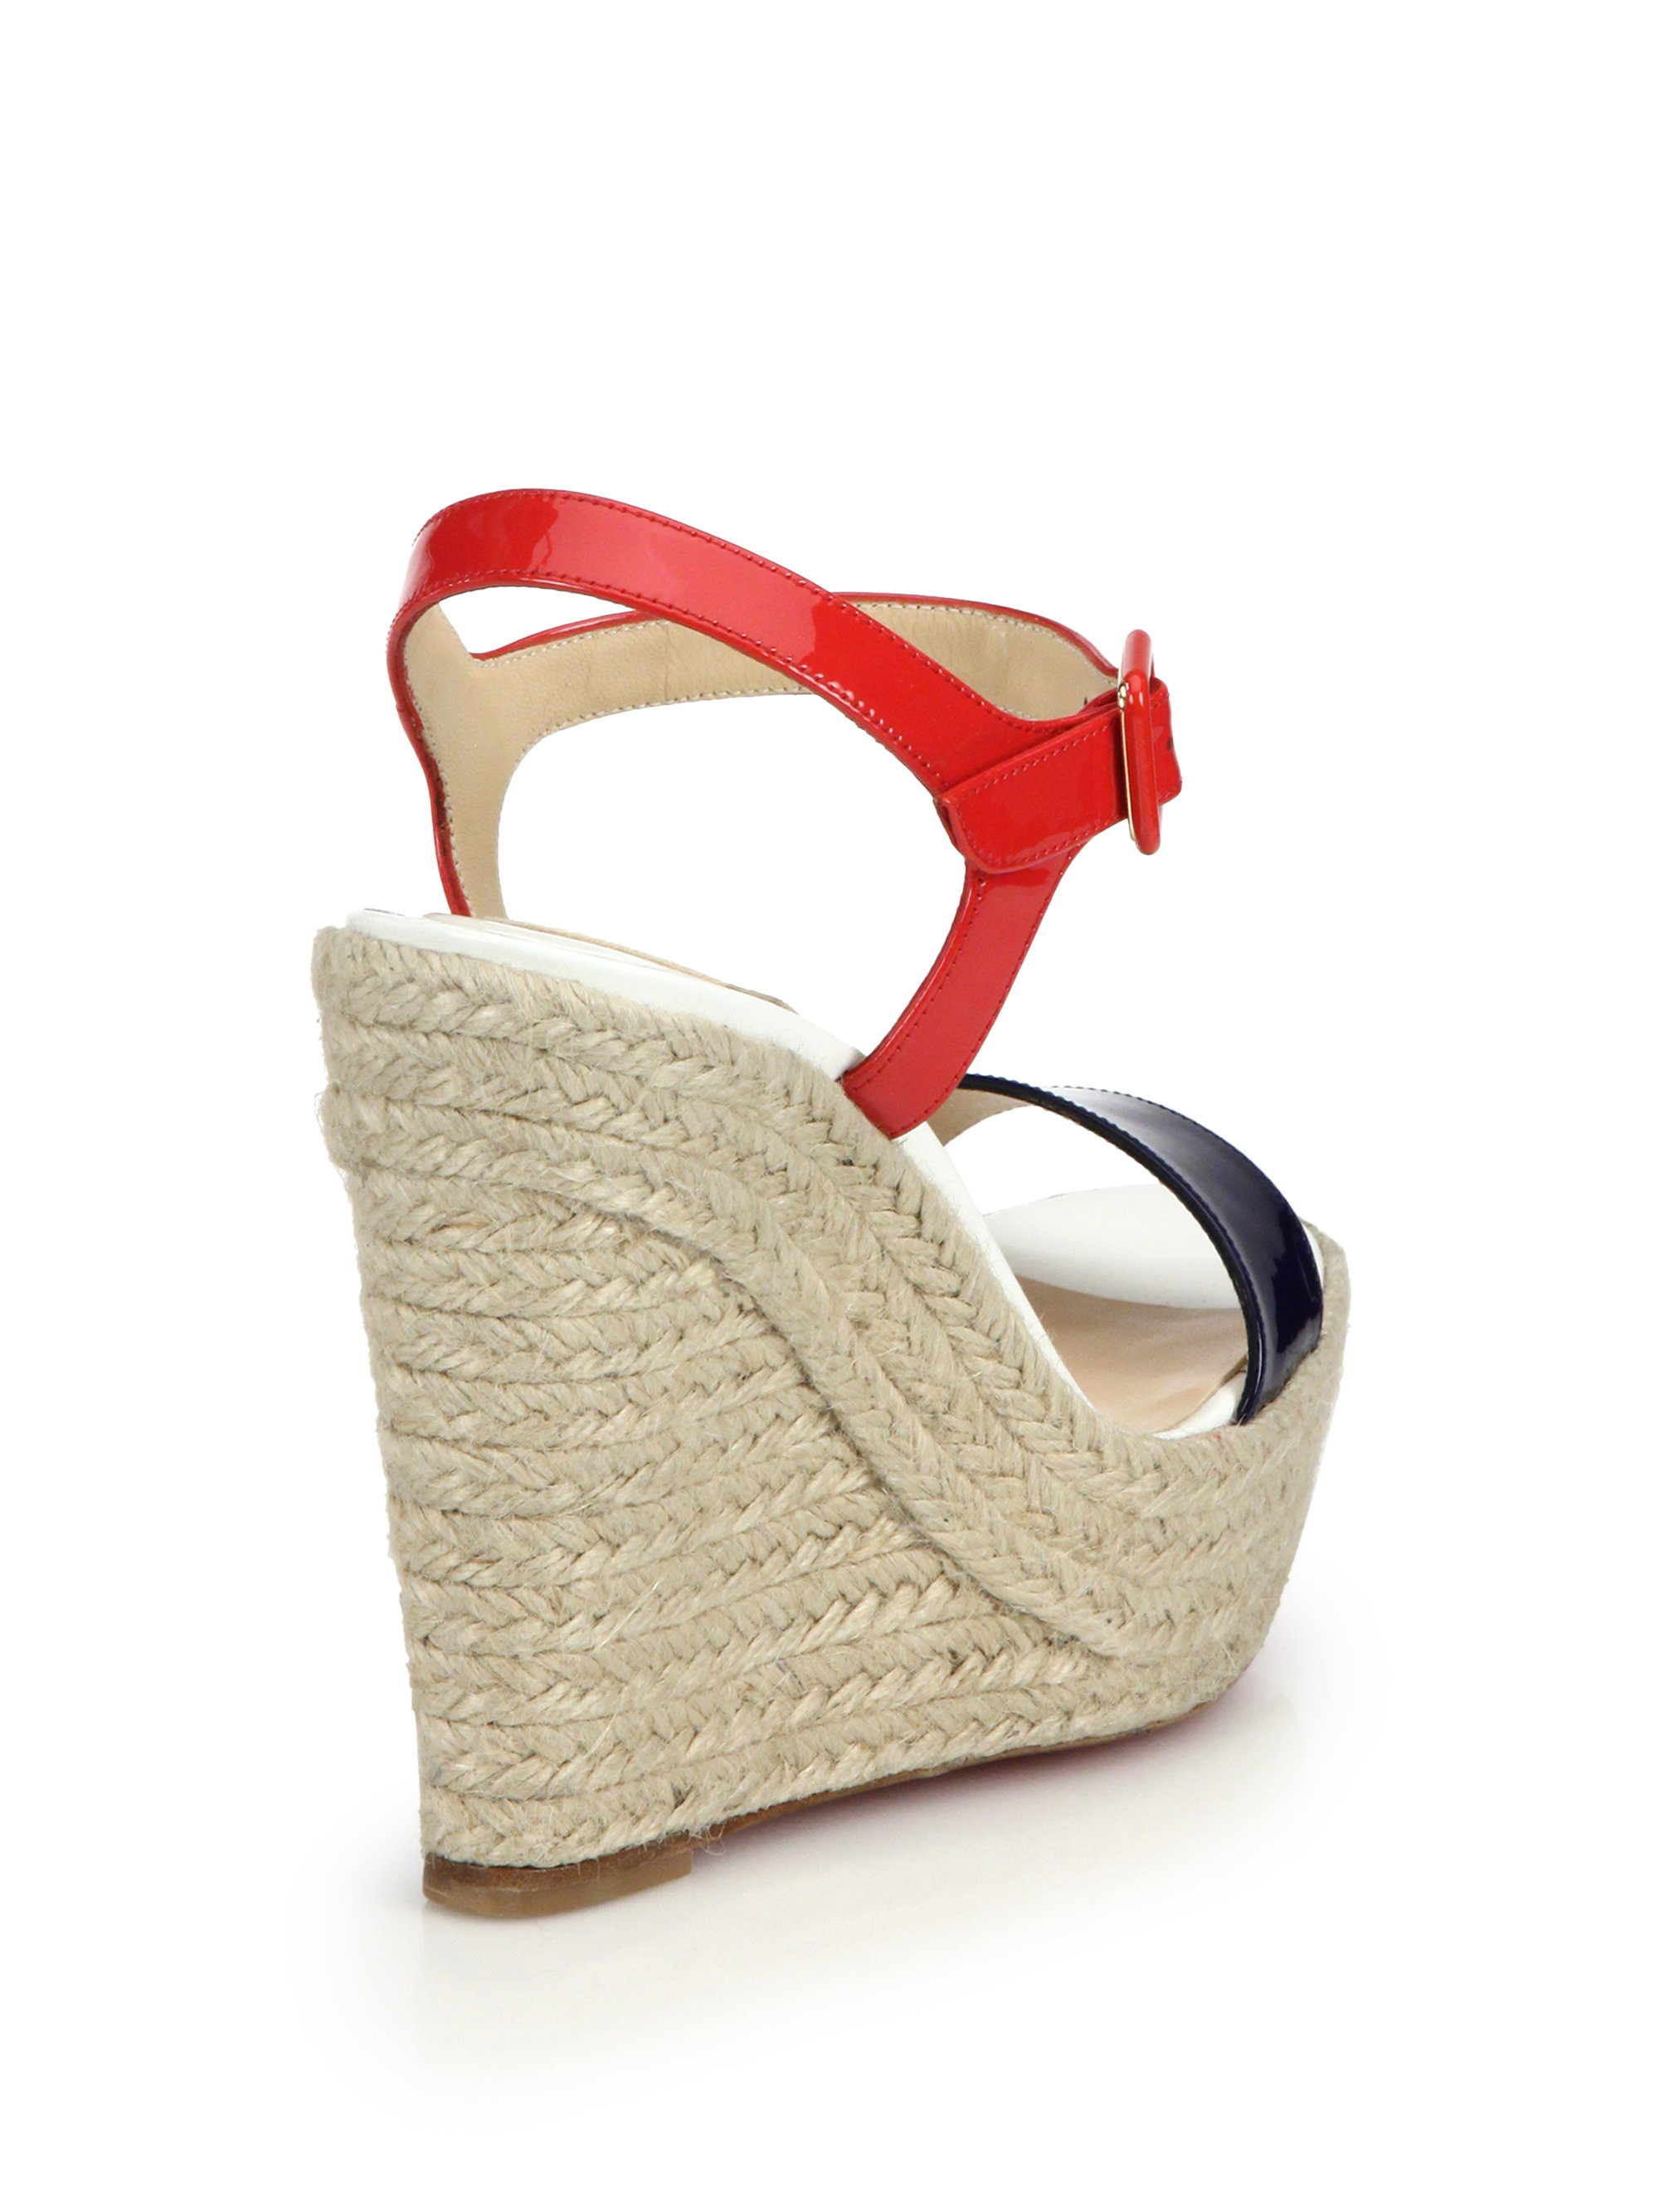 Christian louboutin Spachica Patent Leather Espadrille Wedge ...